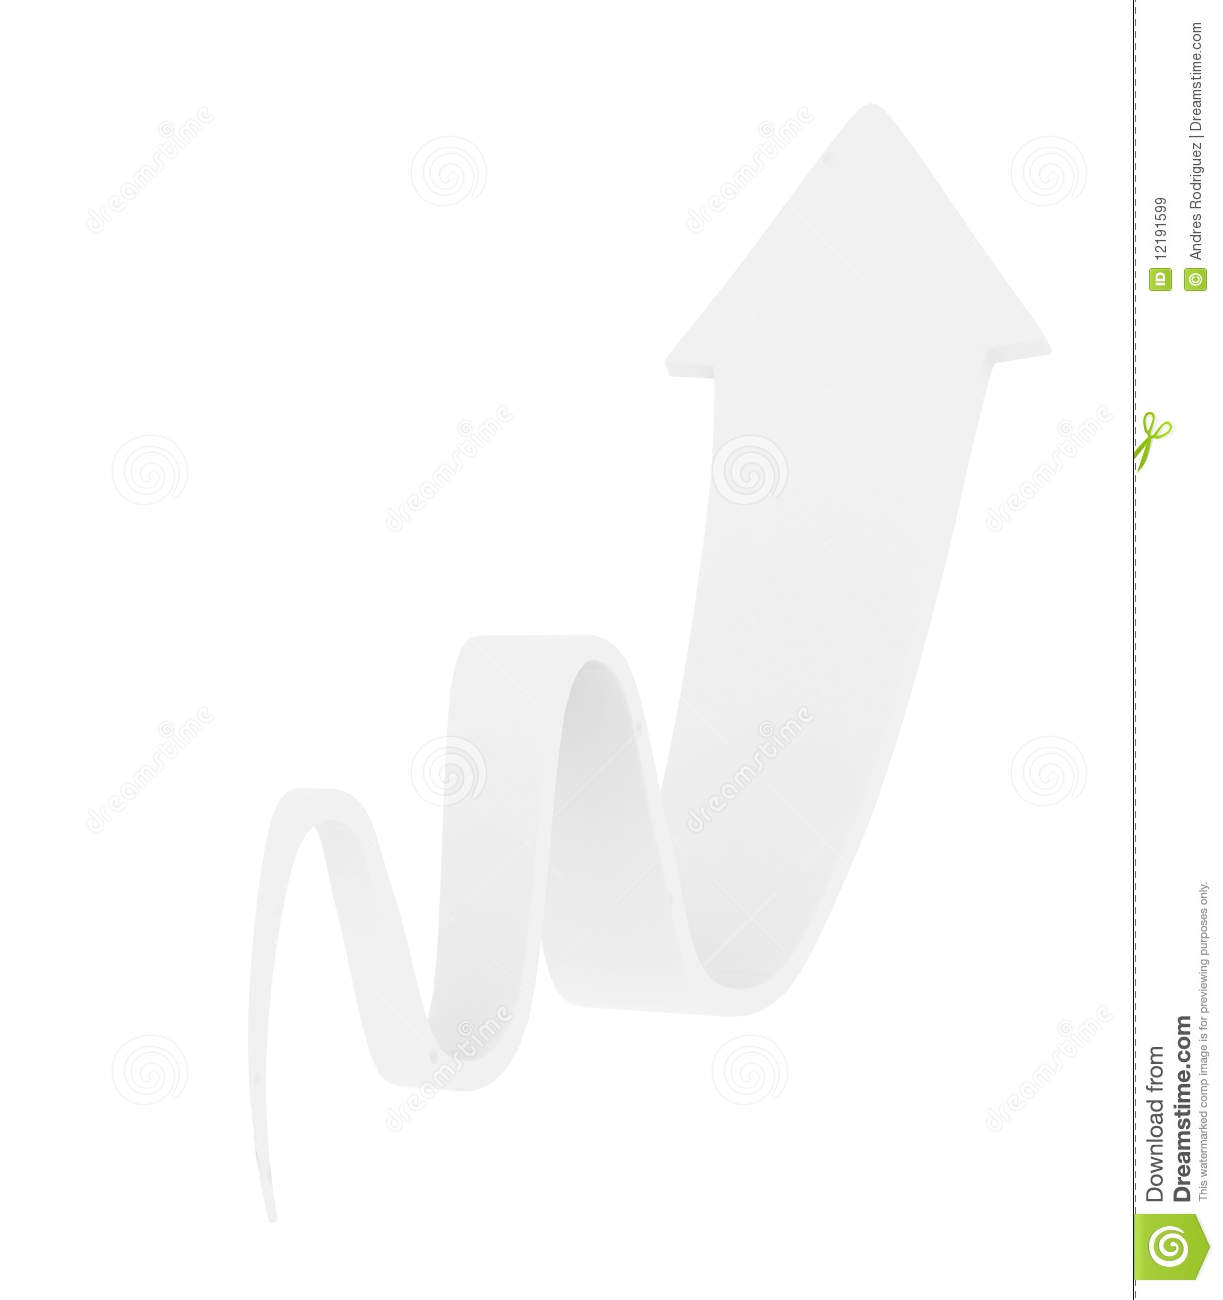 Curved Arrow Royalty Free Stock Images   Image  12191599